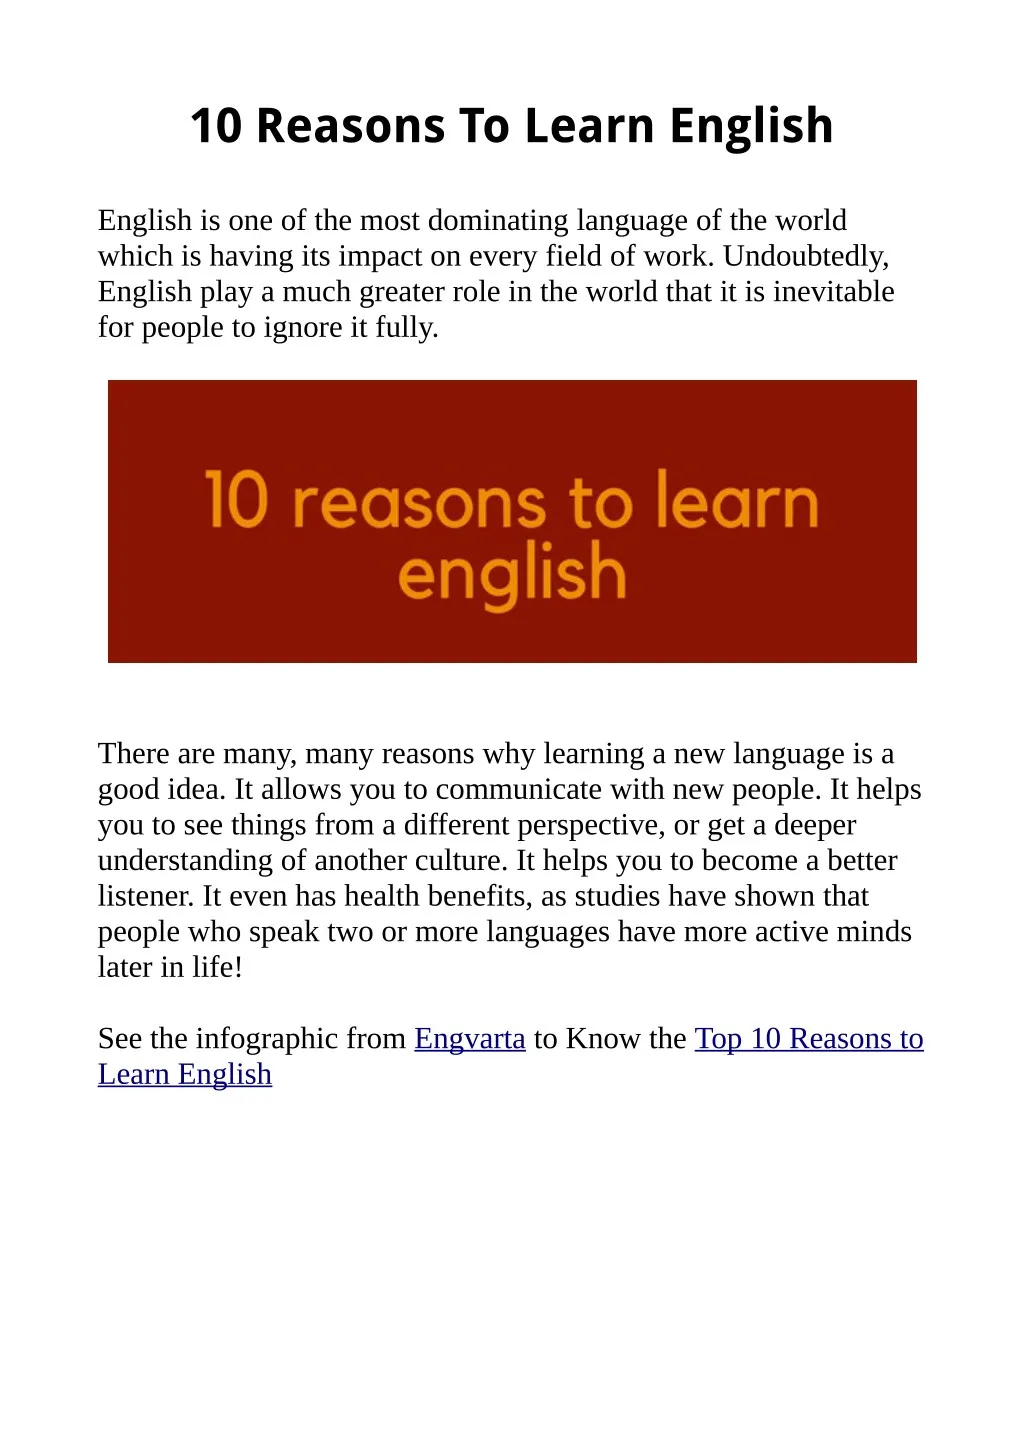 10 reasons to learn english